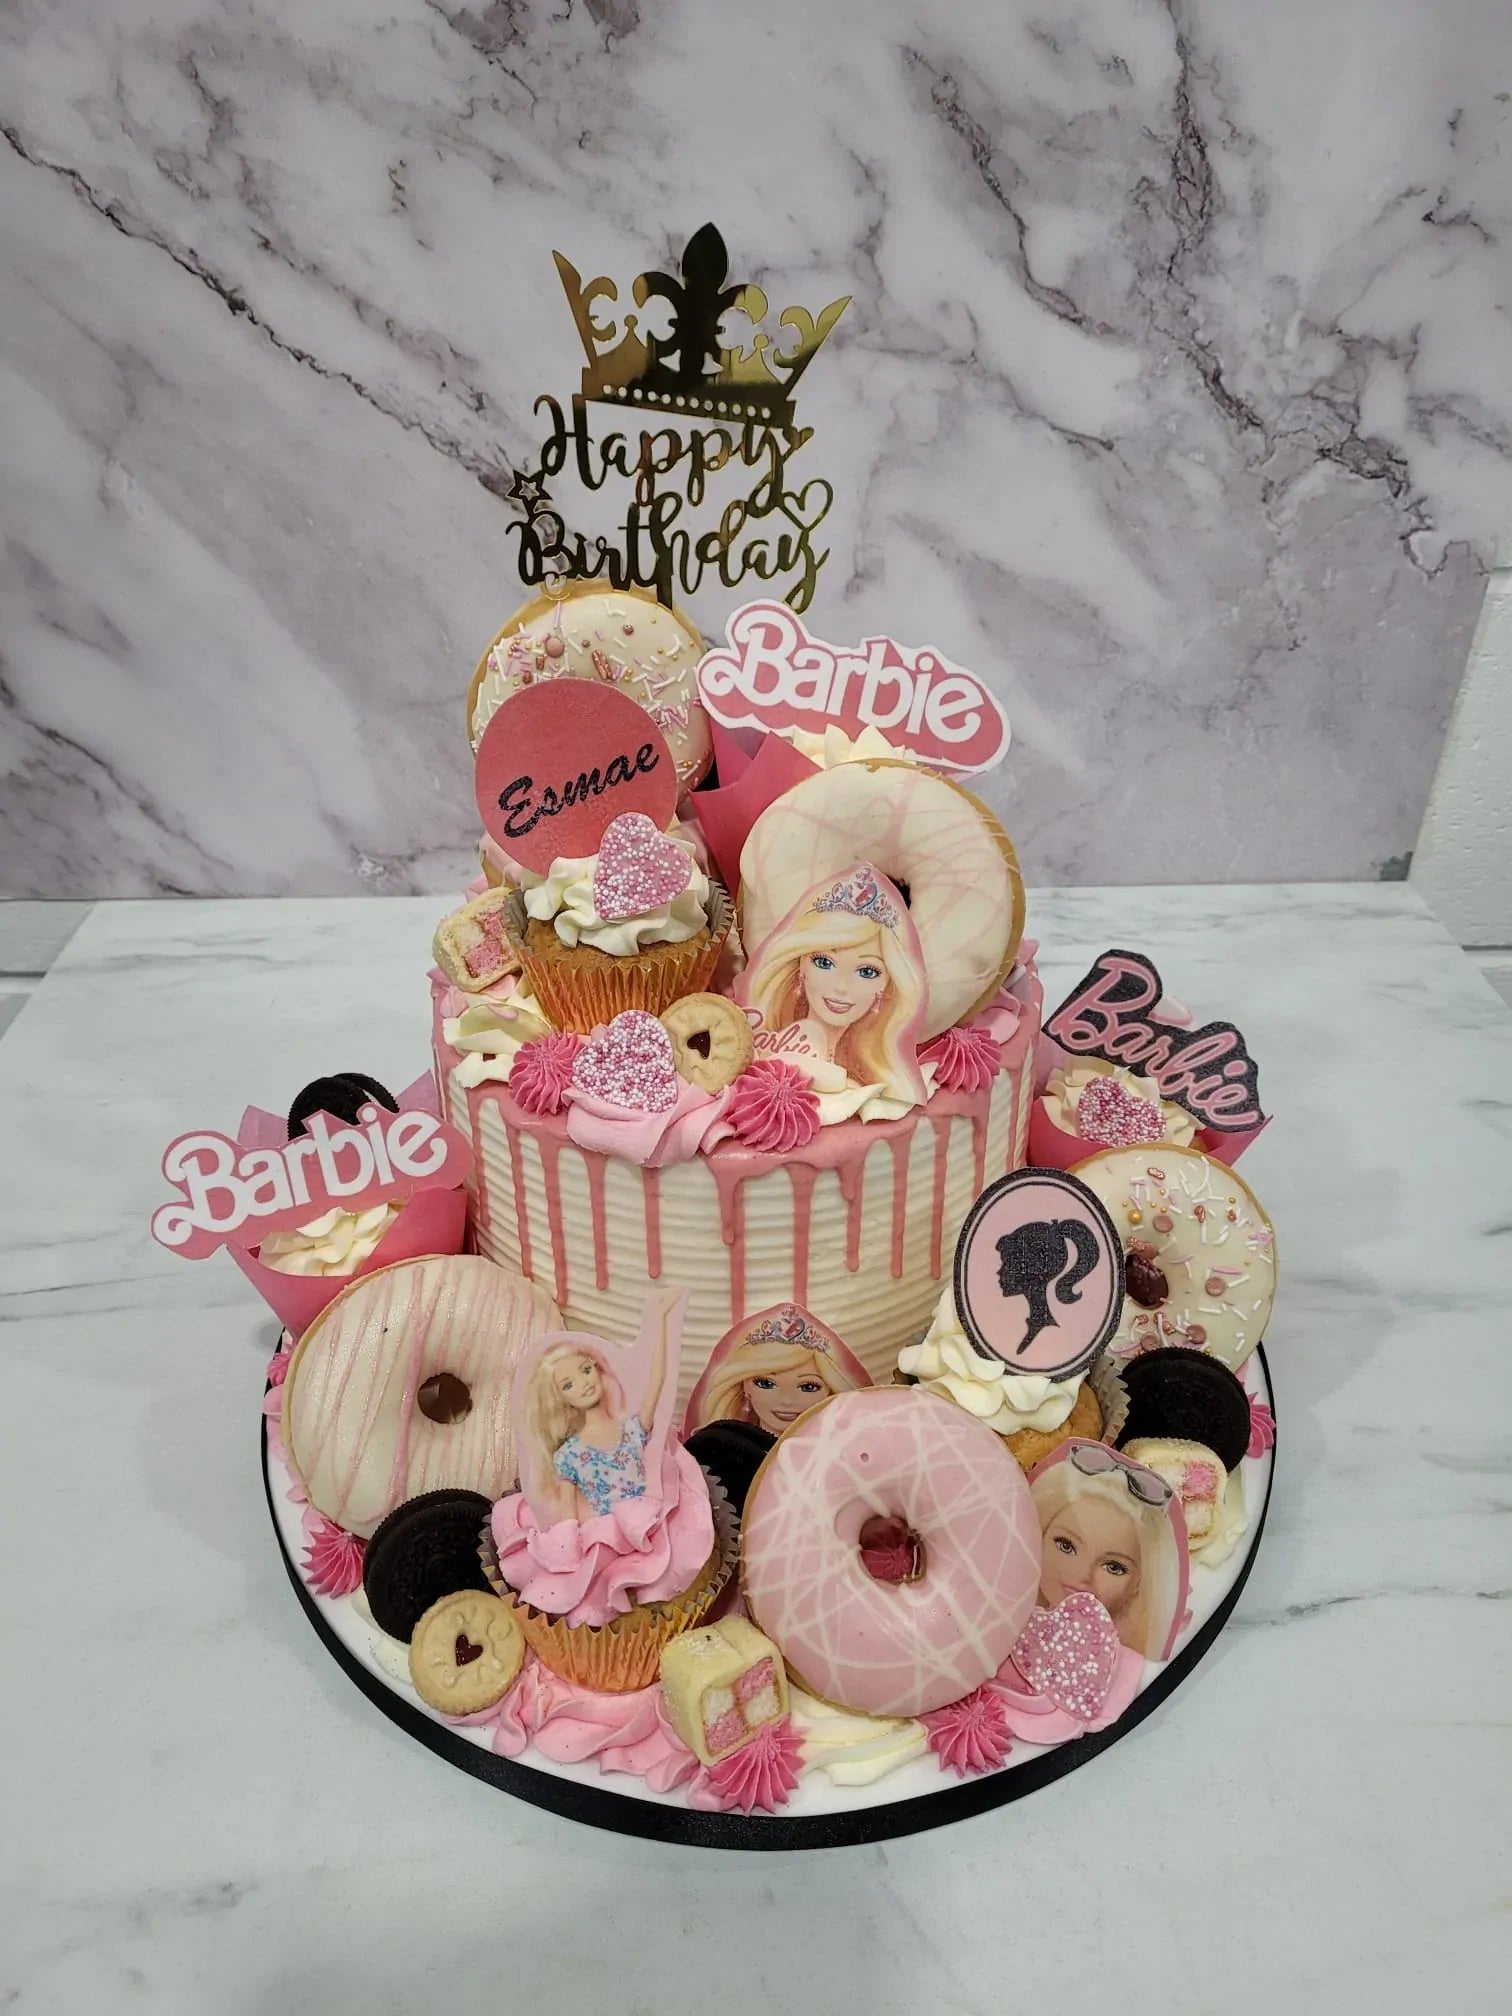 Barbie doll cake, mini doll cakes, cupcakes and a toothache